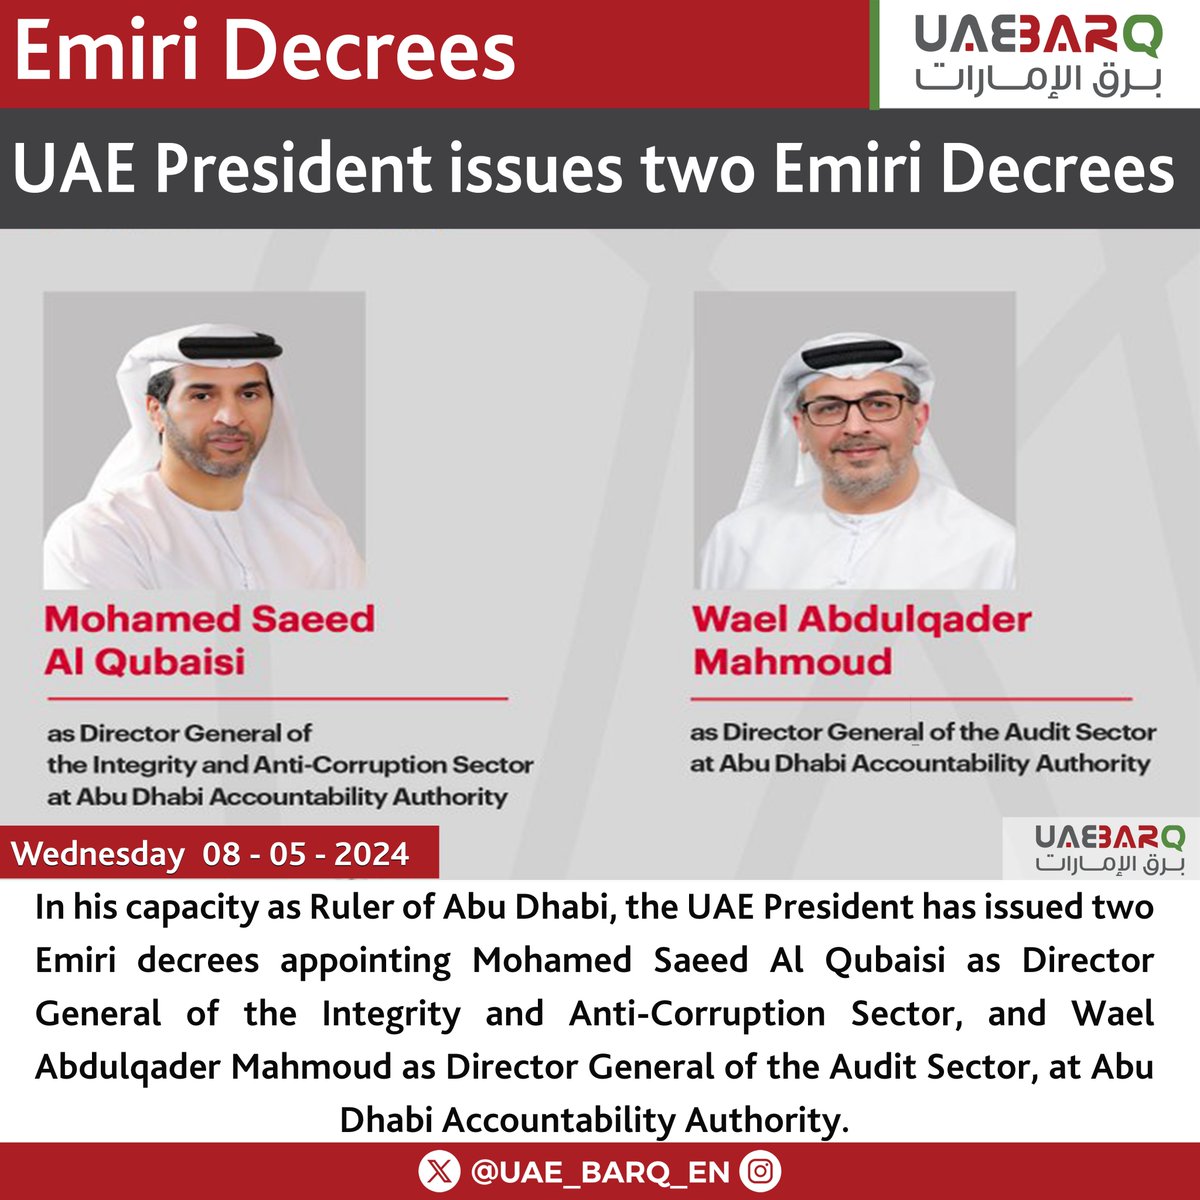 #UAE_President has issued two Emiri #decrees appointing Mohamed Saeed Al Qubaisi as Director General of the Integrity and Anti-Corruption Sector, and Wael Abdulqader Mahmoud as Director General of the Audit Sector, at Abu Dhabi Accountability Authority. #UAE_BARQ_EN